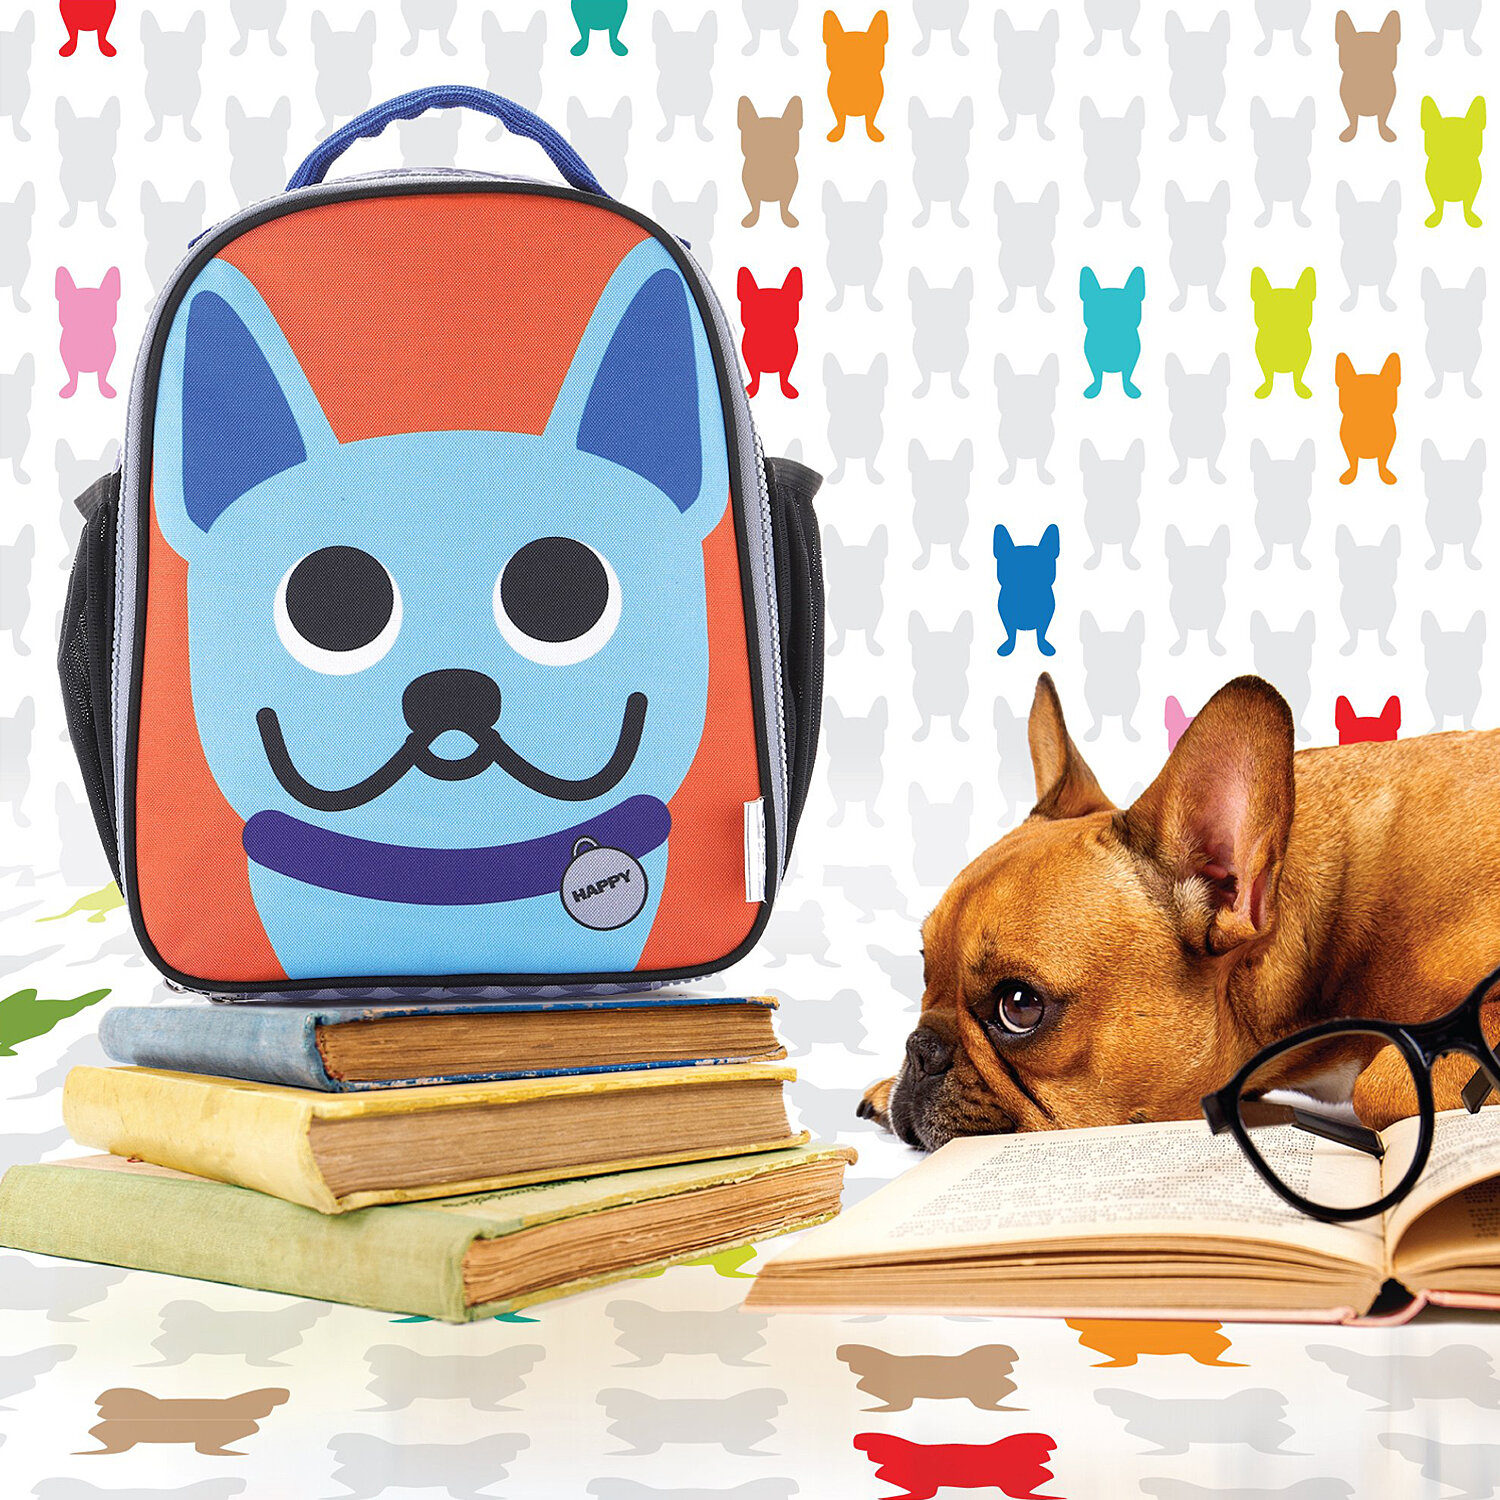  Composite image of French Bull kid’s lunch bag, pattern background and stock image using Photoshop and Illustrator 